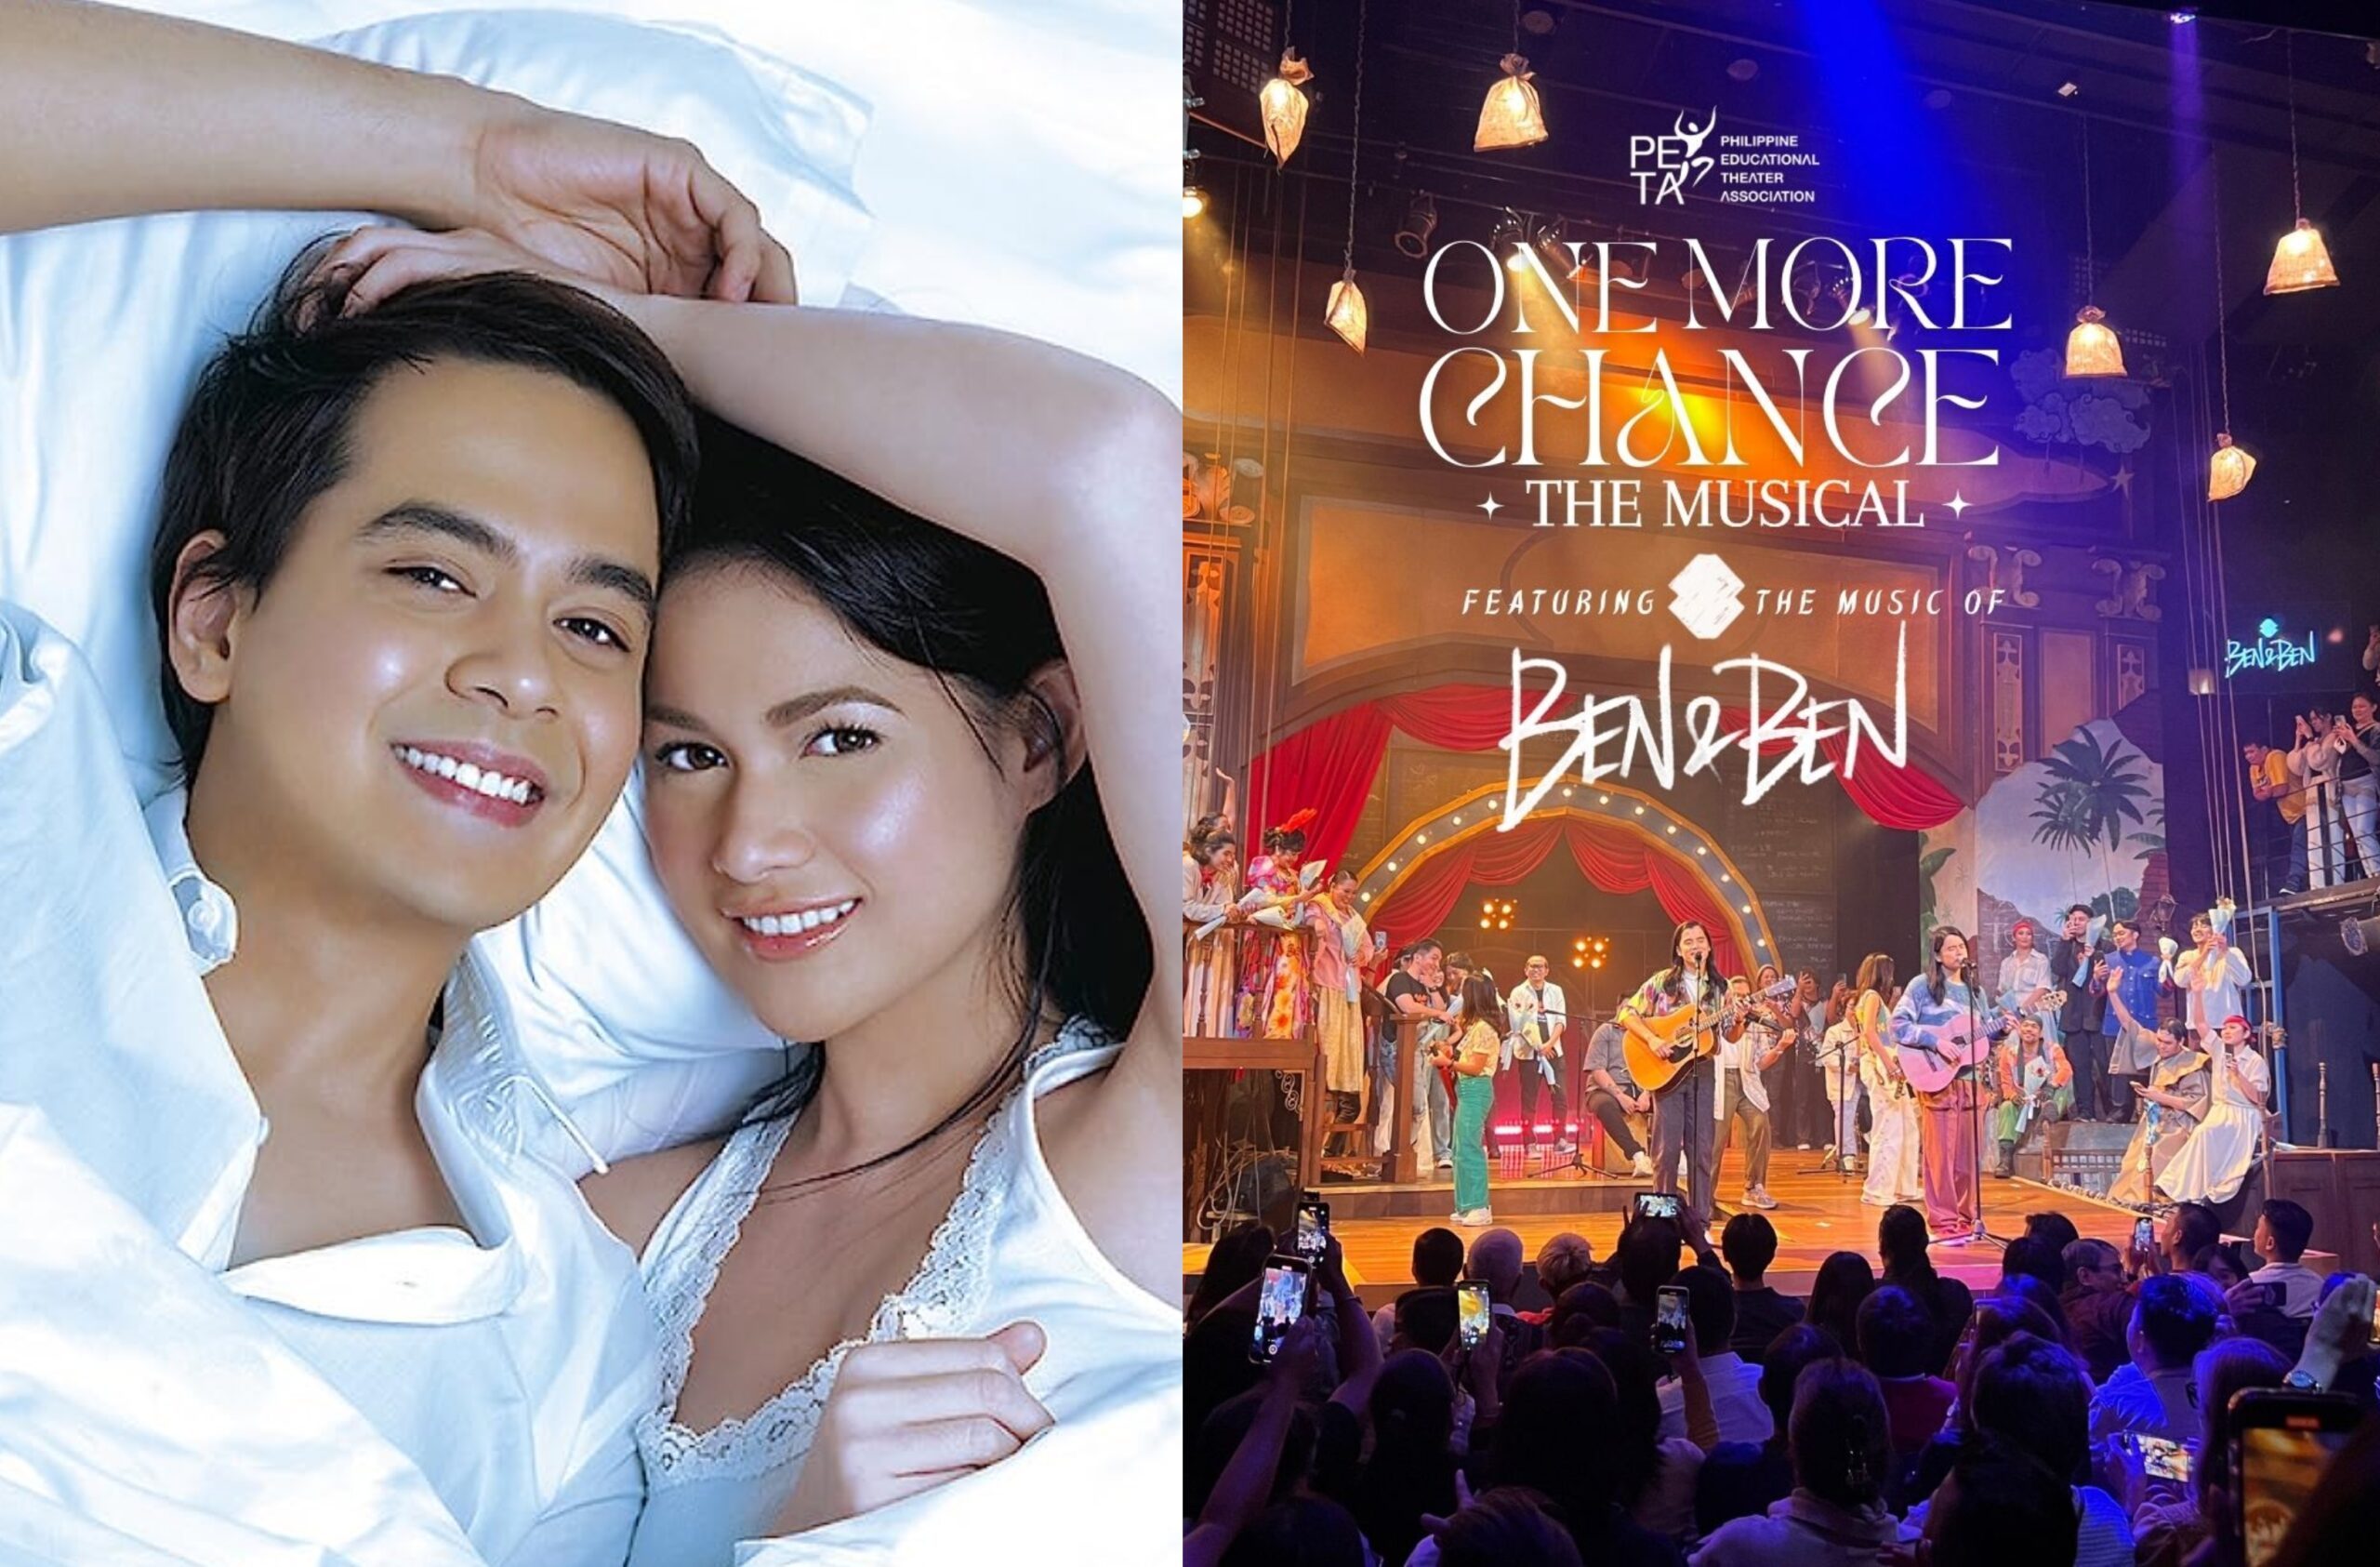 You chose to break my heart: A ‘One More Chance’ musical is in the works